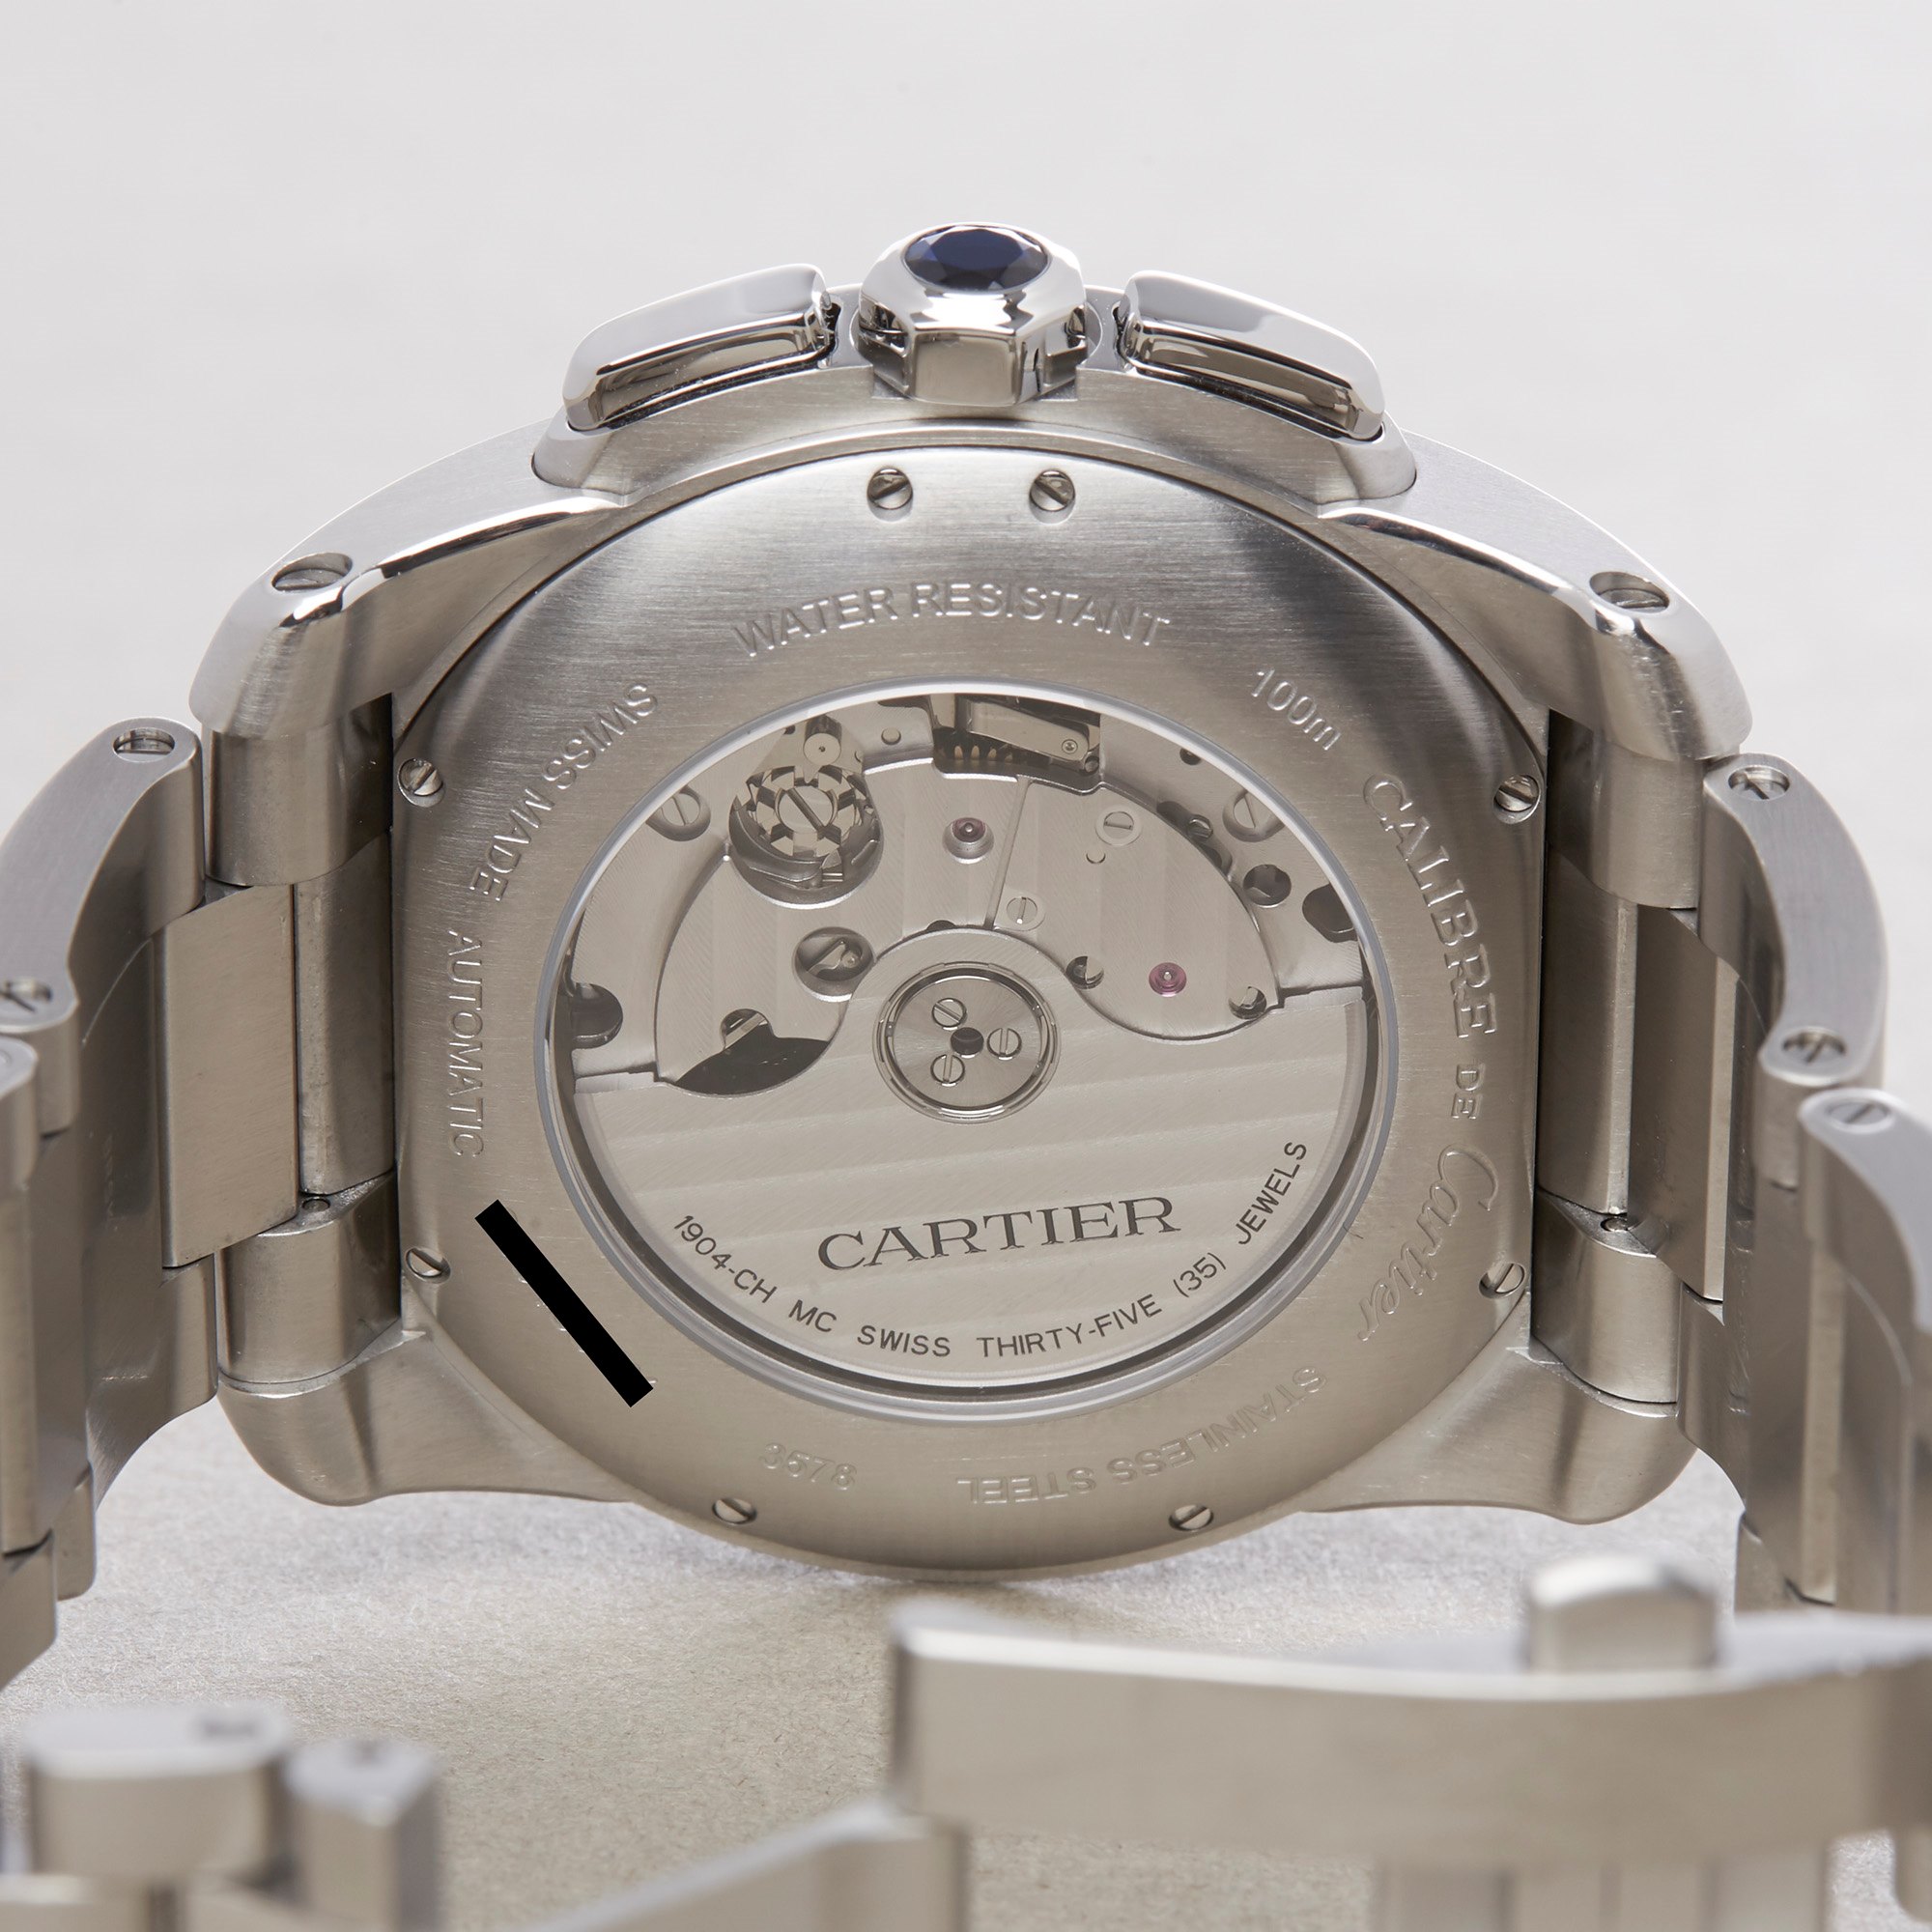 Cartier Calibre de Cartier Chronograph Stainless Steel Watch W7100045 or 3578 - Image 9 of 10